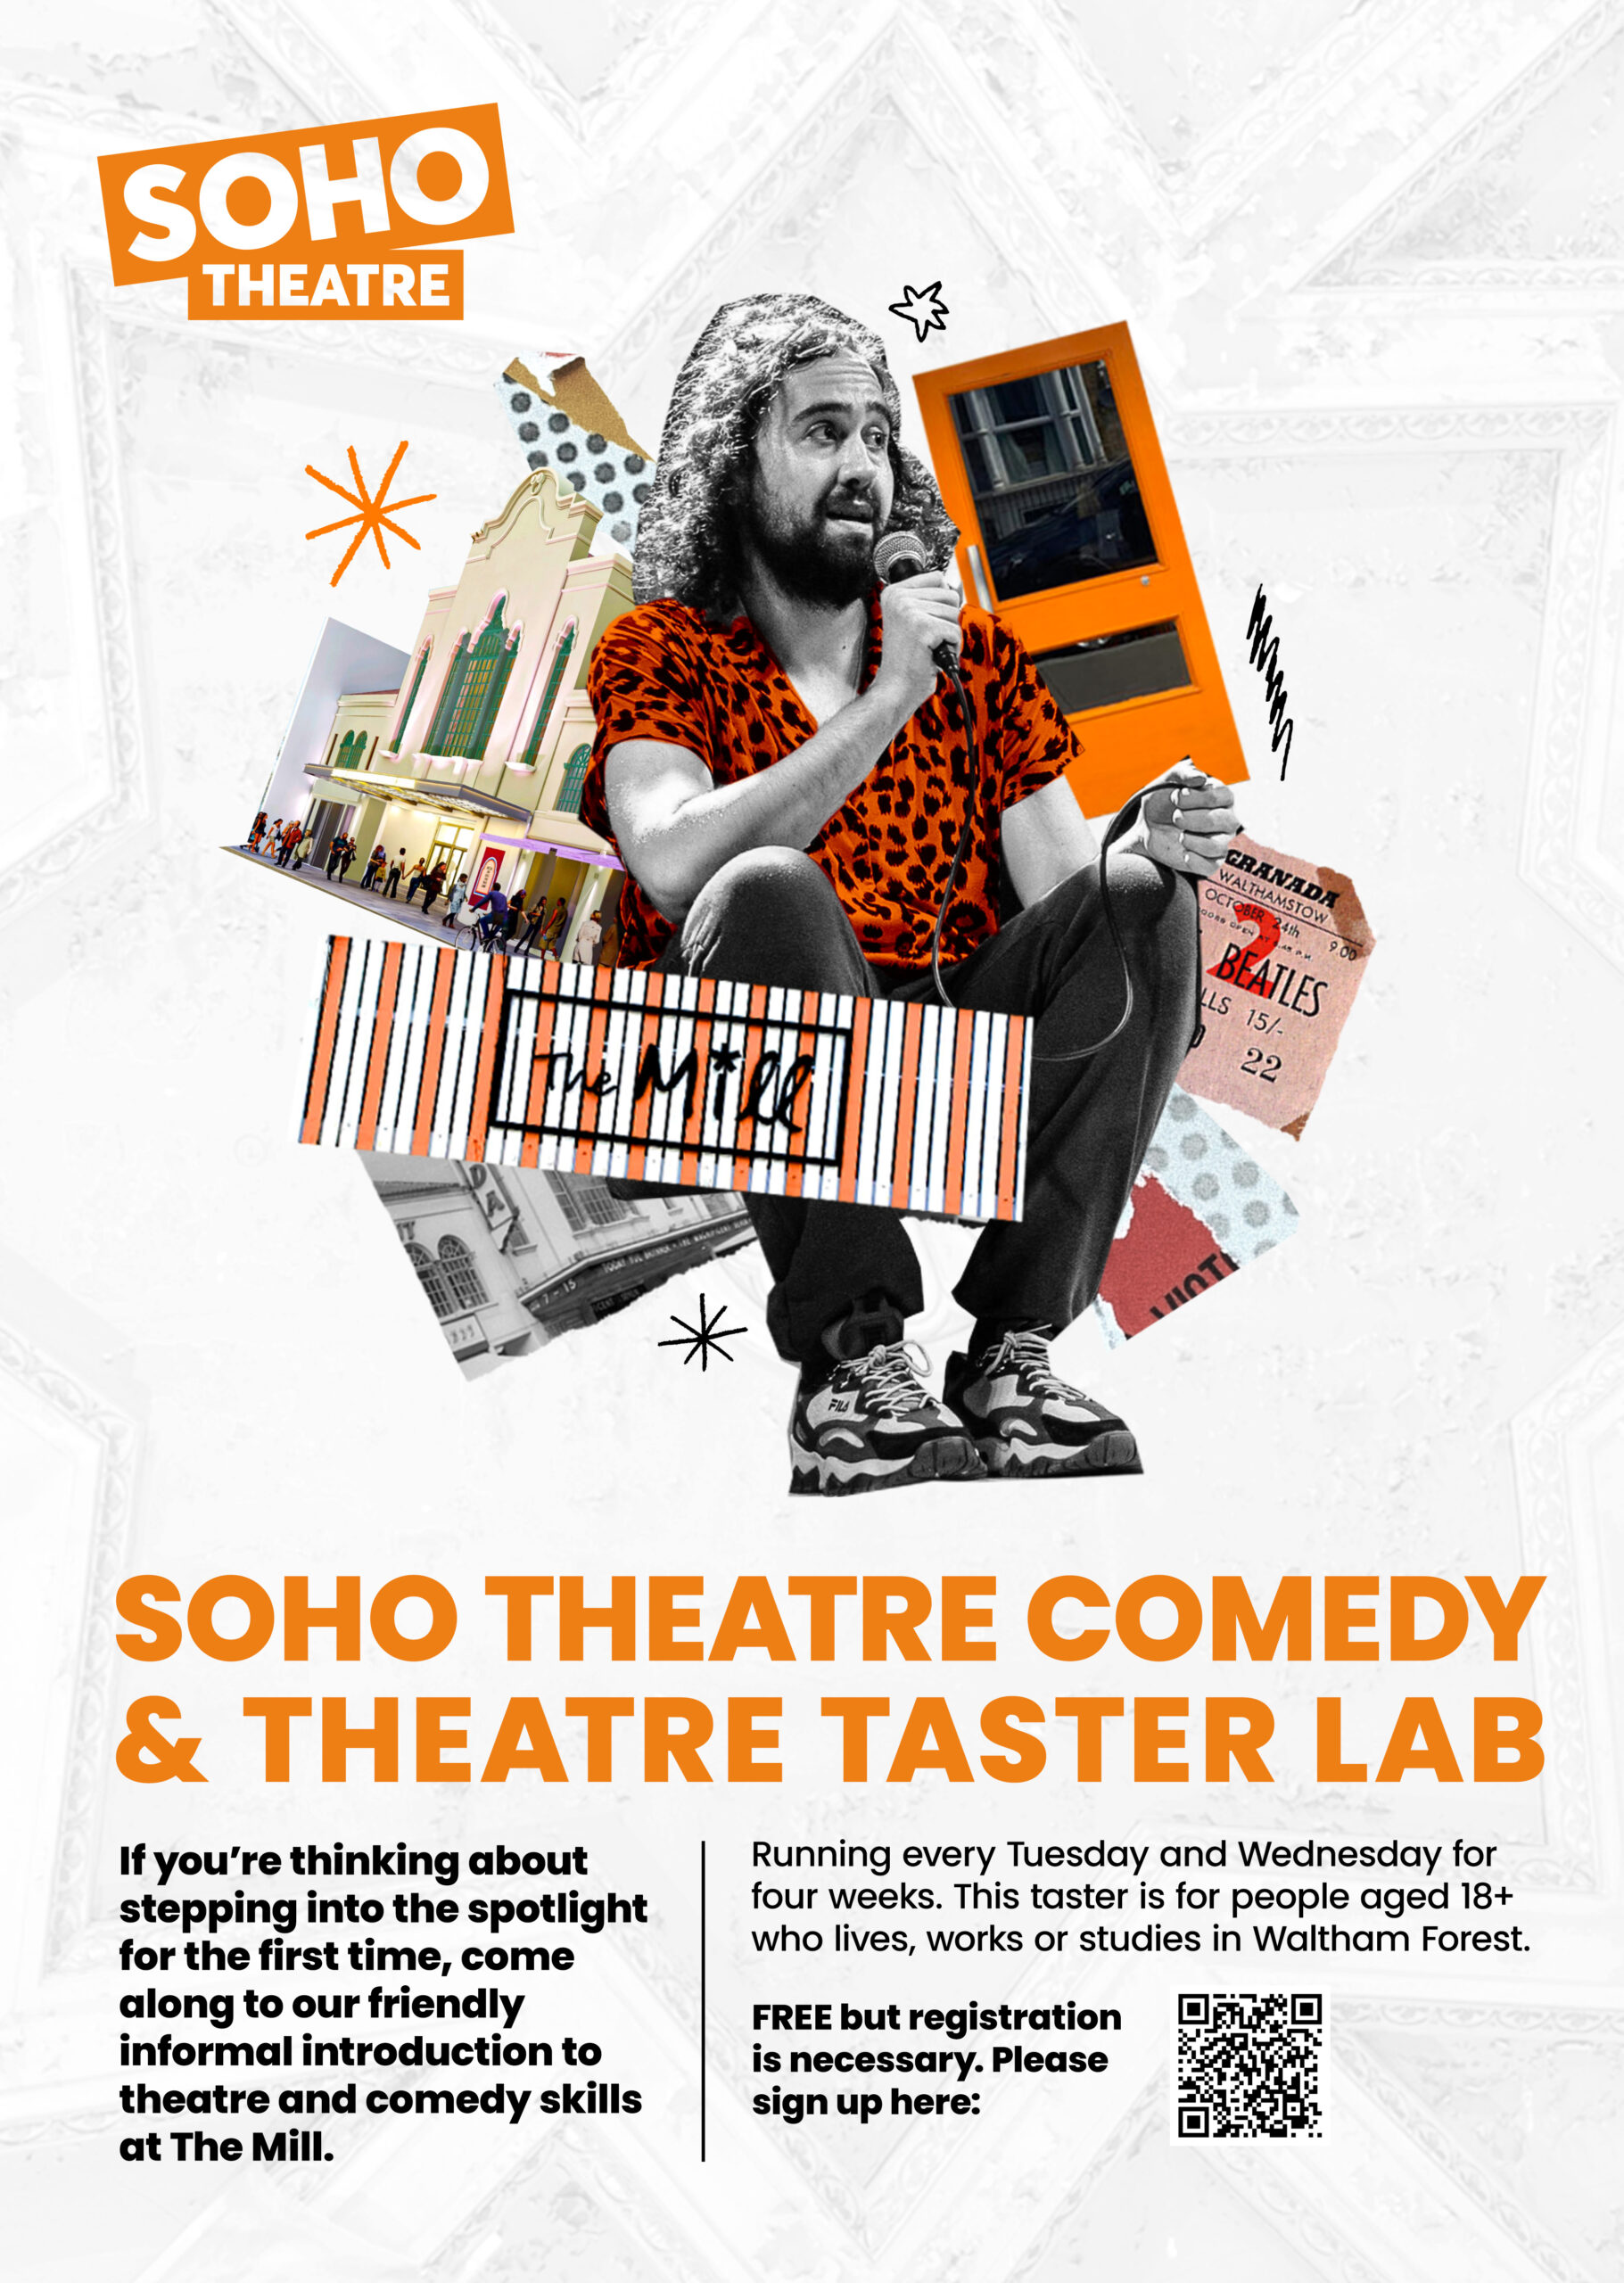 Soho Theatre Comedy & Theatre tasters, led by Ben Salmon